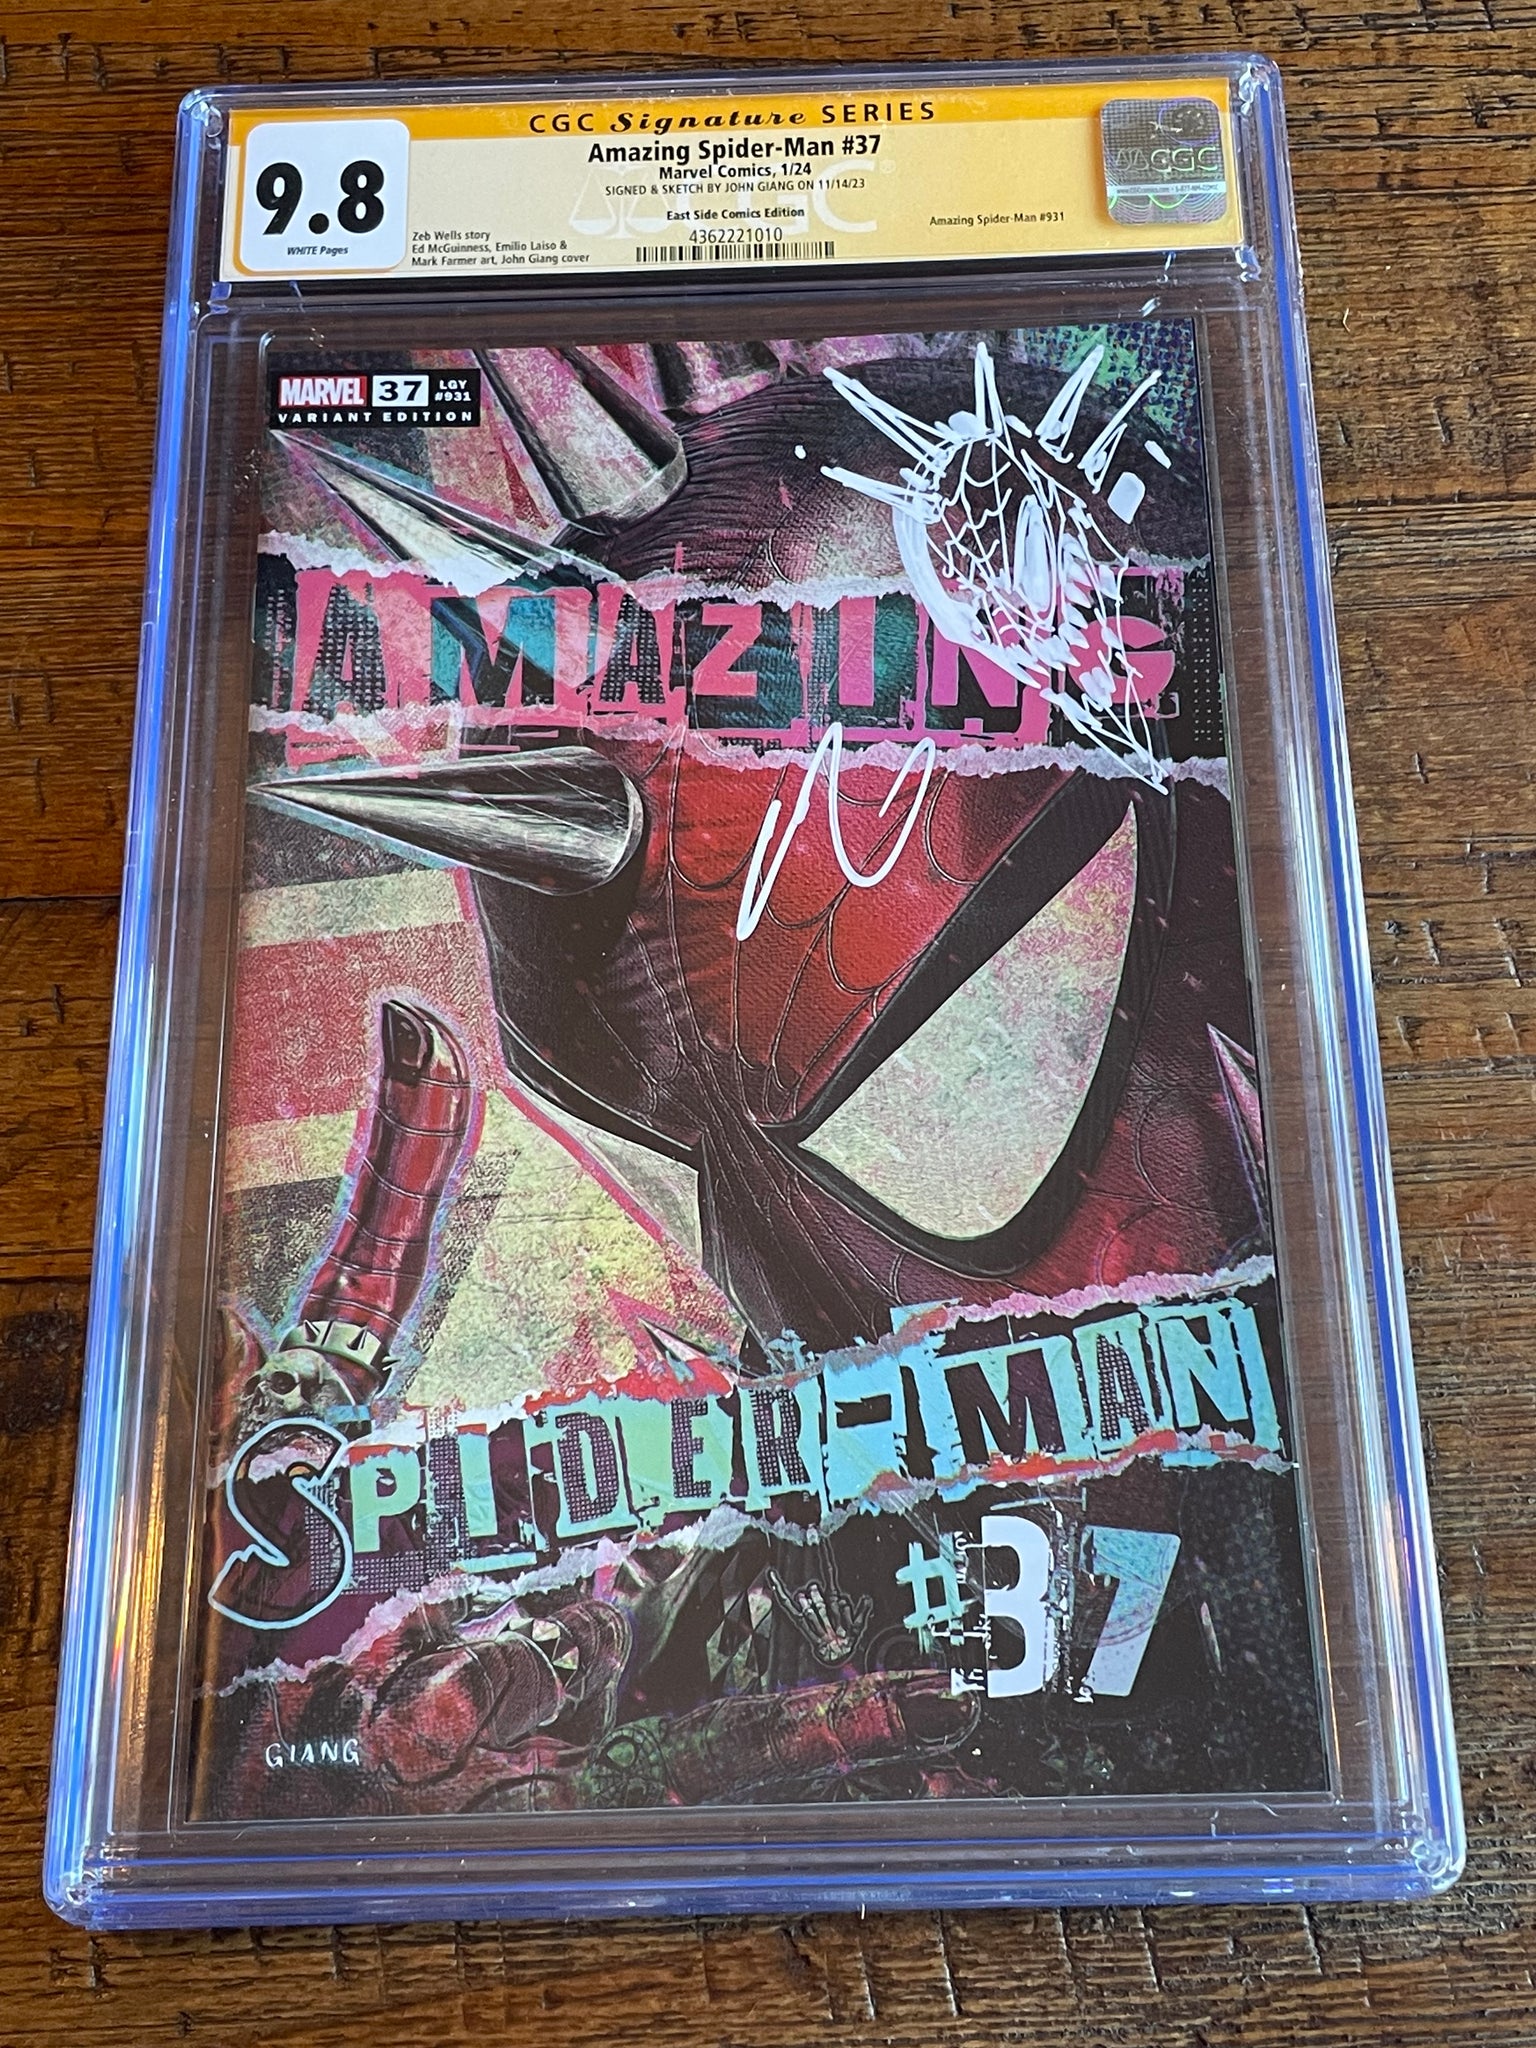 AMAZING SPIDER-MAN #37 CGC SS 9.8 JOHN GIANG SIGNED & REMARK SPIDER-PUNK TRADE VARIANT-A